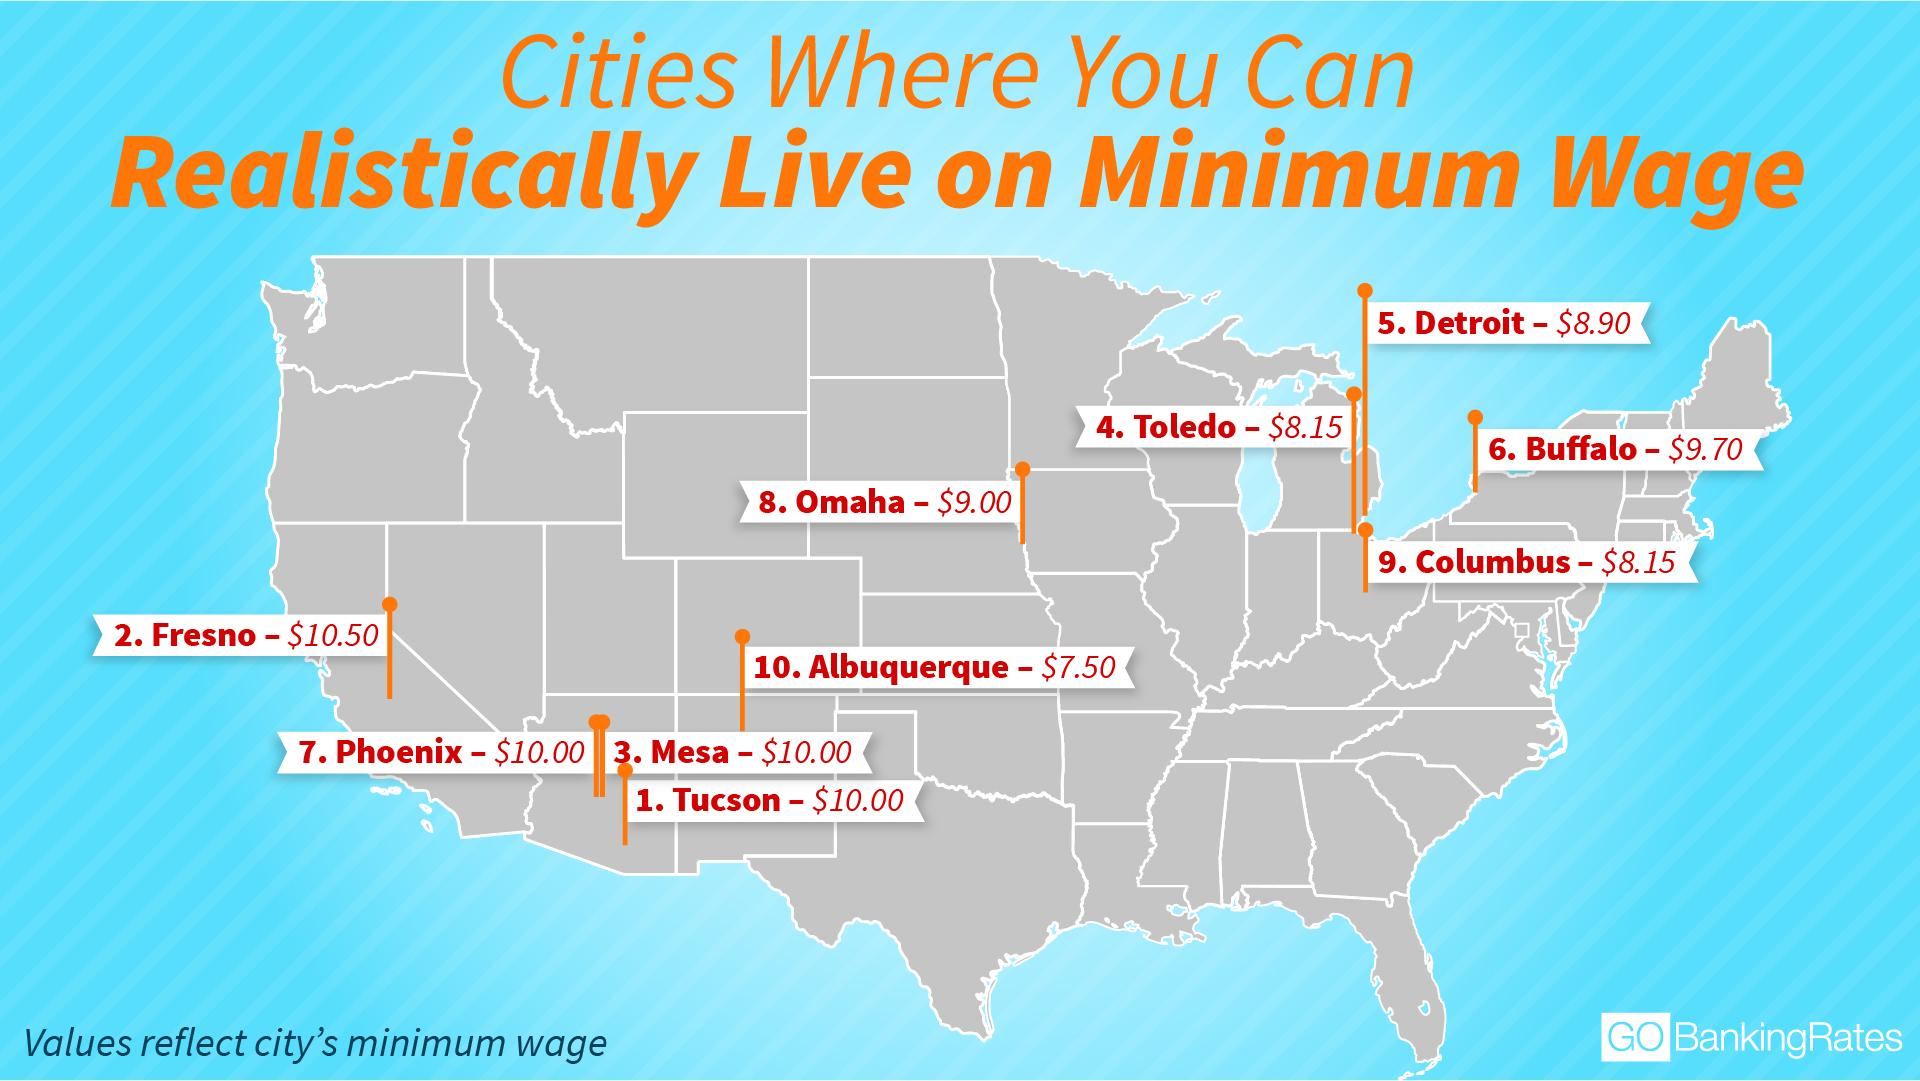 Cities Where You Can Realistically Live on Minimum Wage